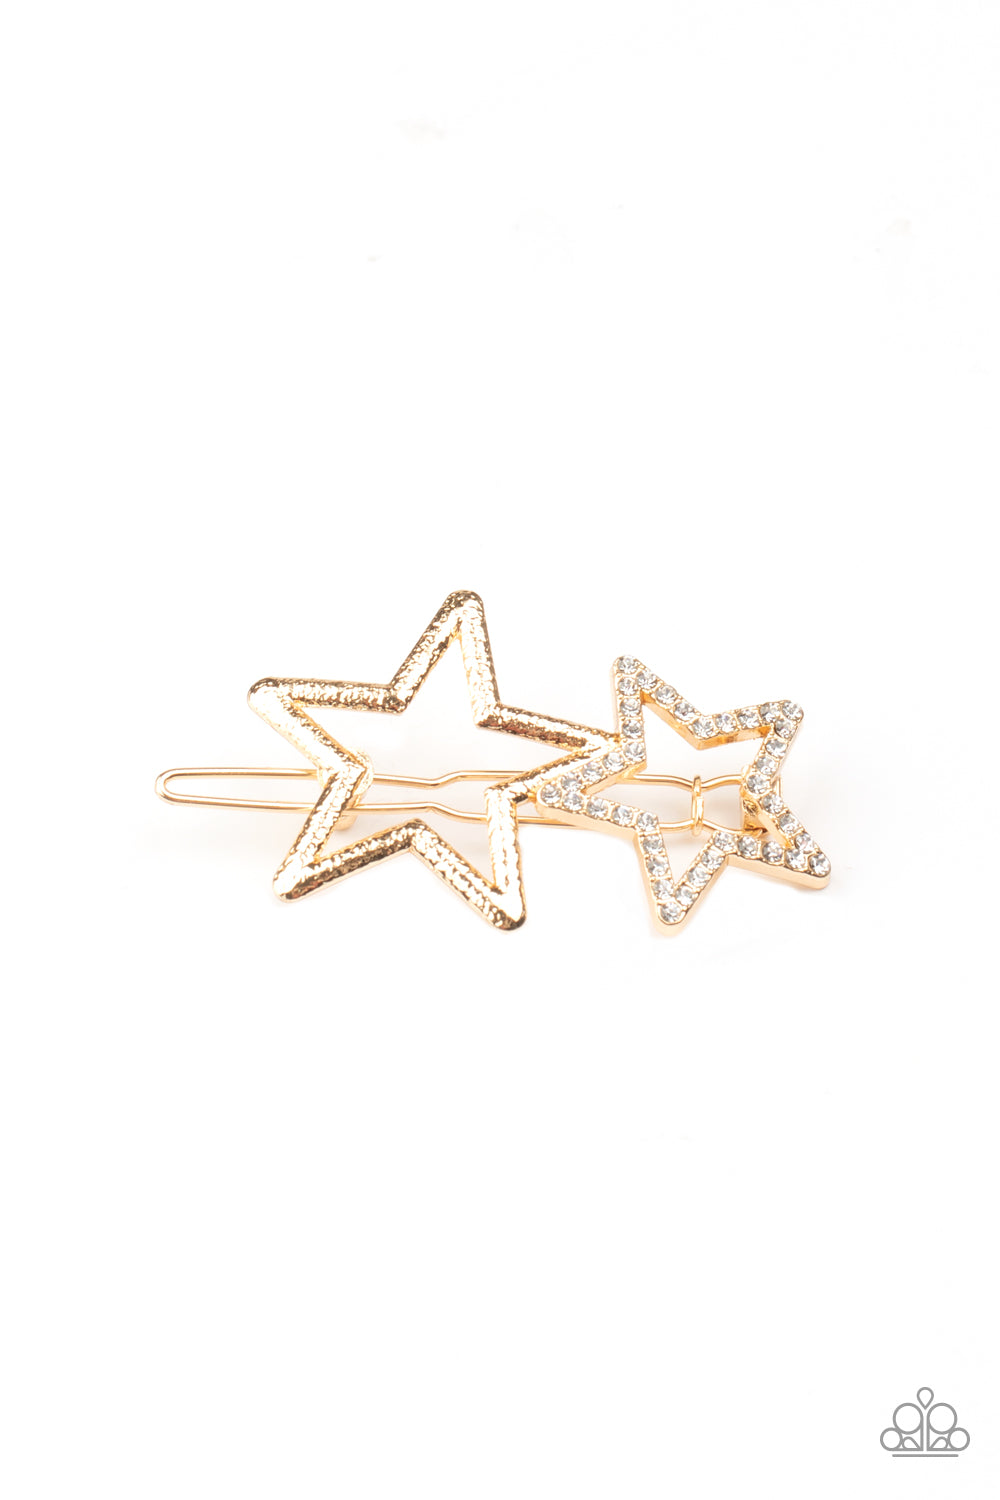 Paparazzi Hair Accessories ~ Lets Get This Party STAR-ted! - Gold